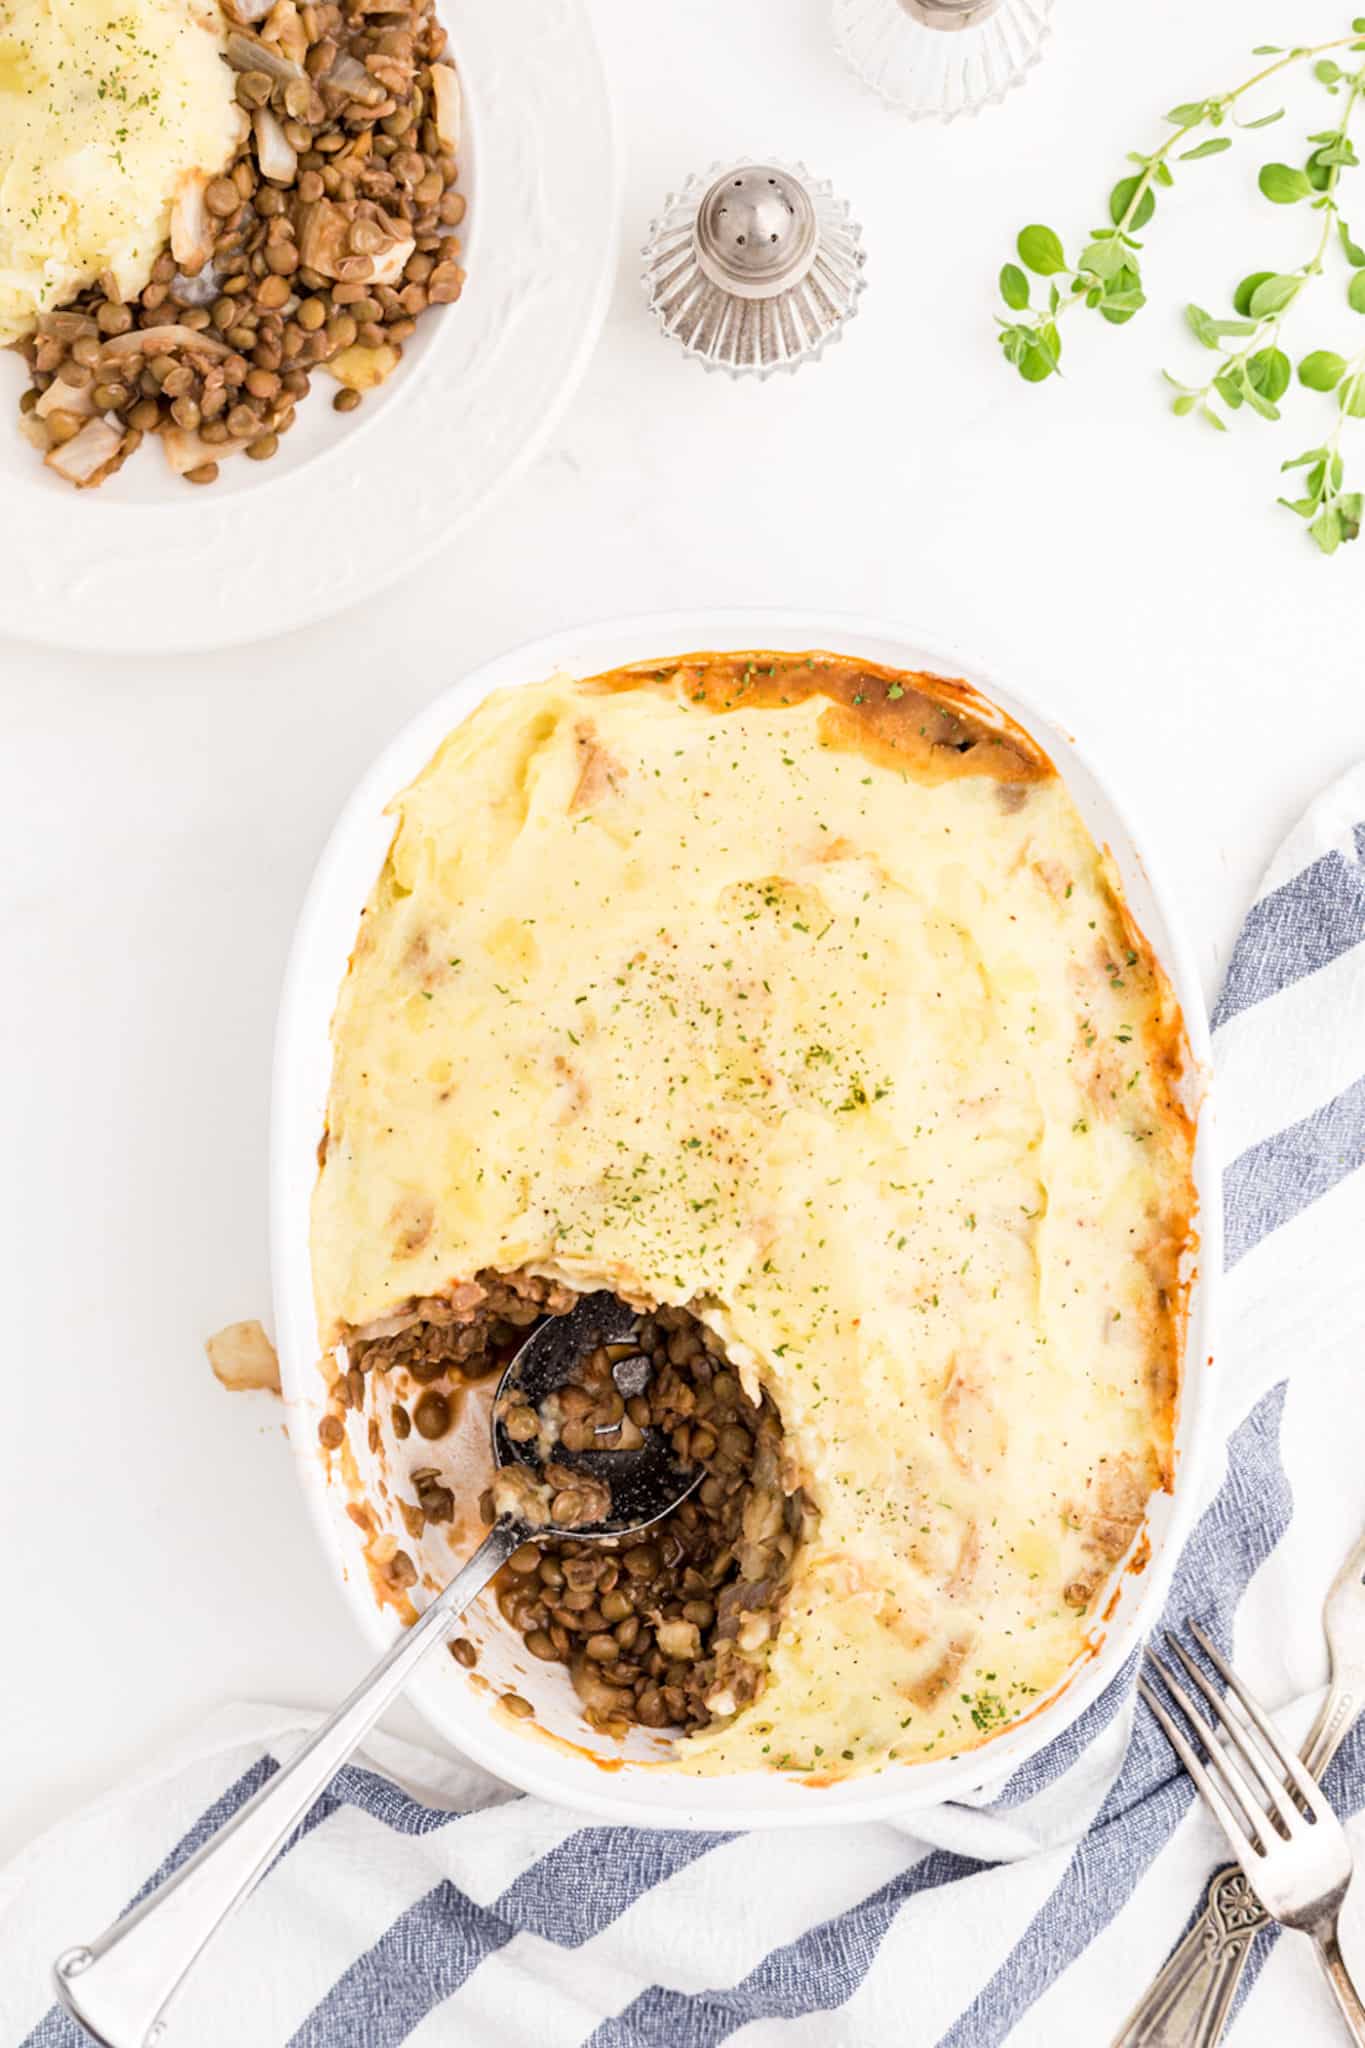 cooked shepherd's pie with lentils on a tabletop.